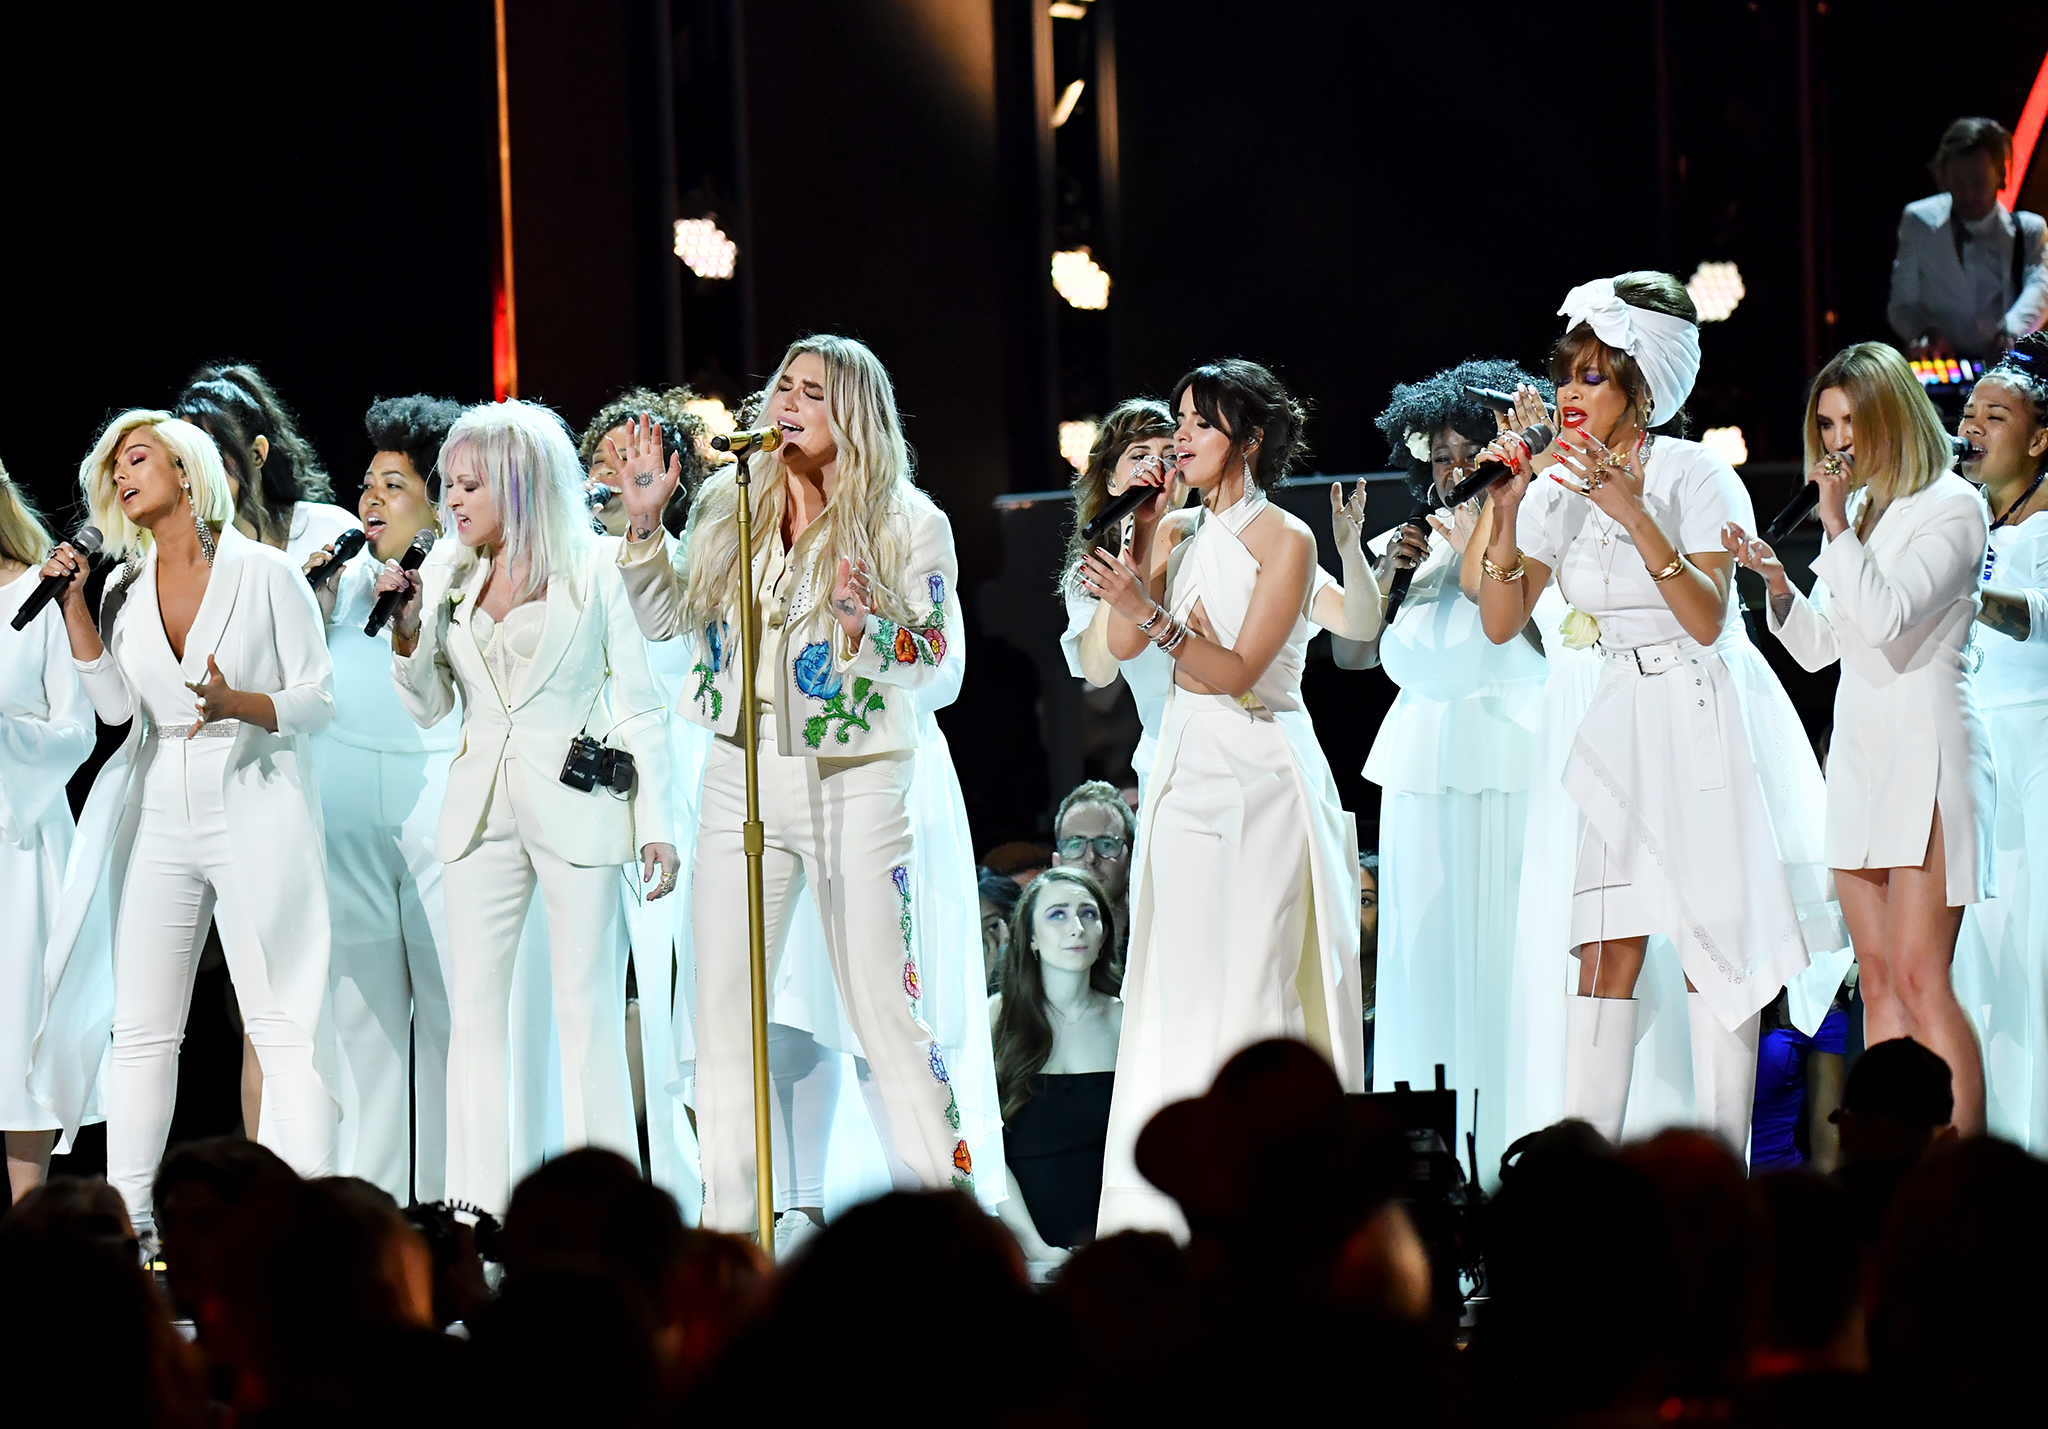 Recording artists Bebe Rexha, Cyndi Lauper, Kesha, Camila Cabello, Andra Day and Julia Michaels perform onstage during the 60th Annual GRAMMY Awards at Madison Square Garden on January 28, 2018 in New York City.